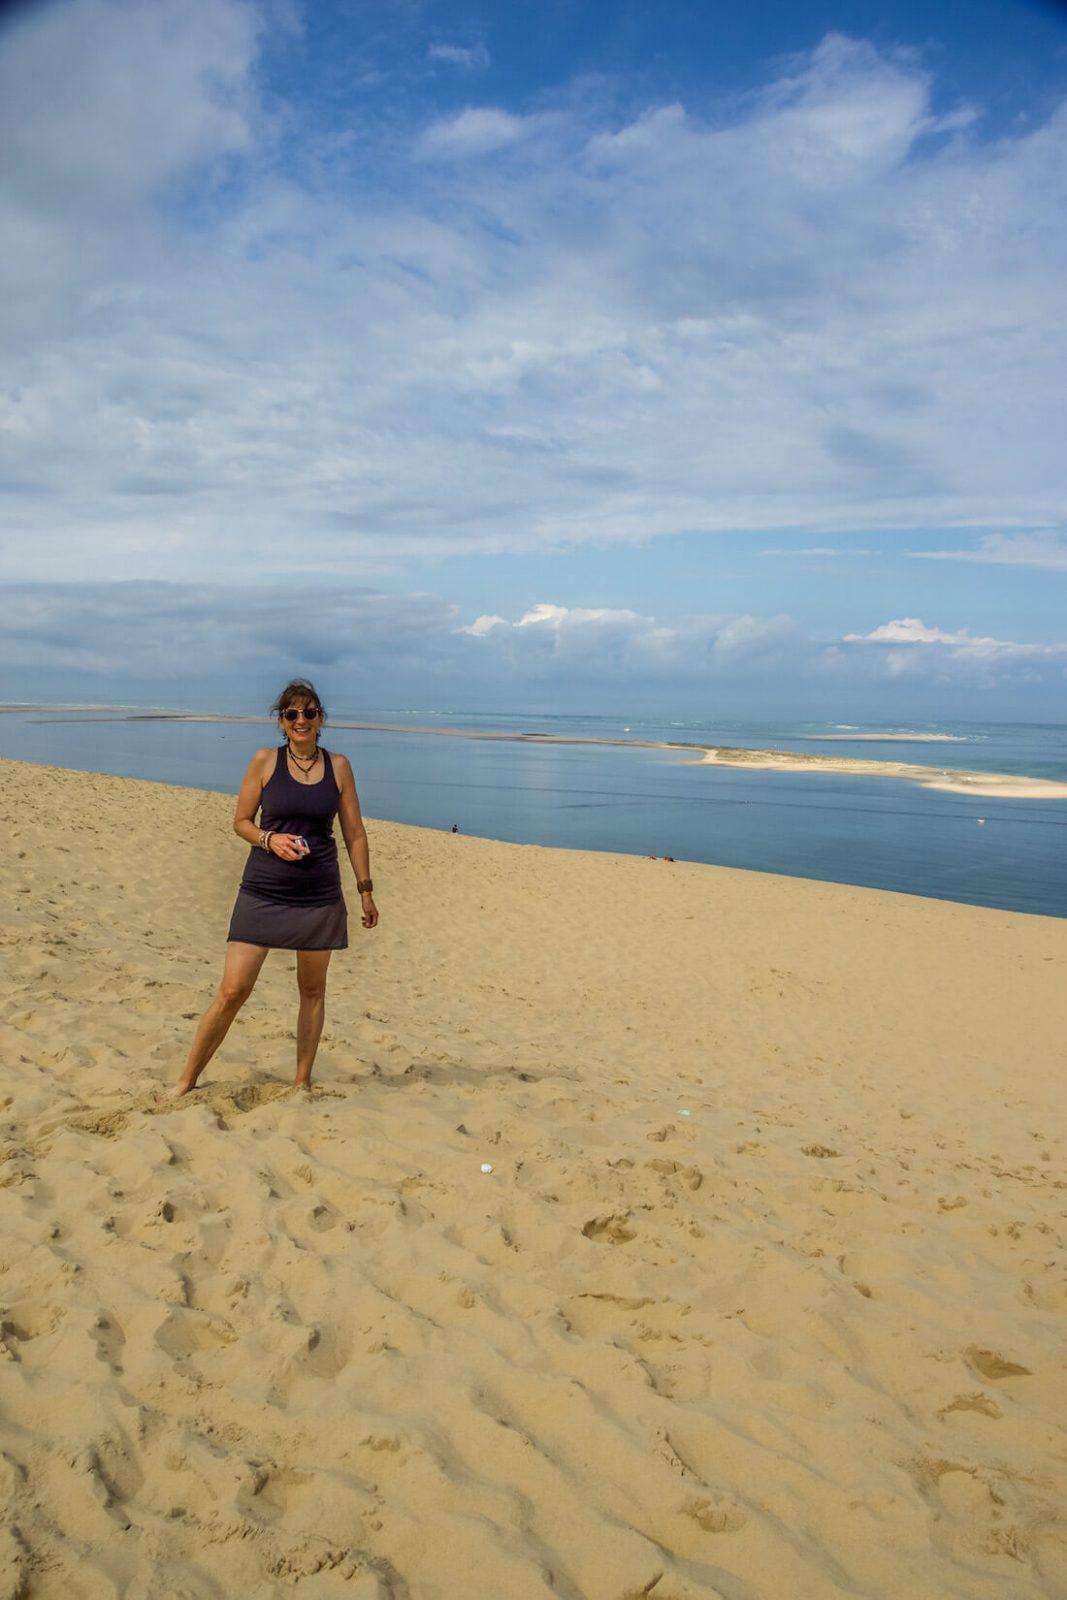 Alison Browne on the sand dune with the ocean behind